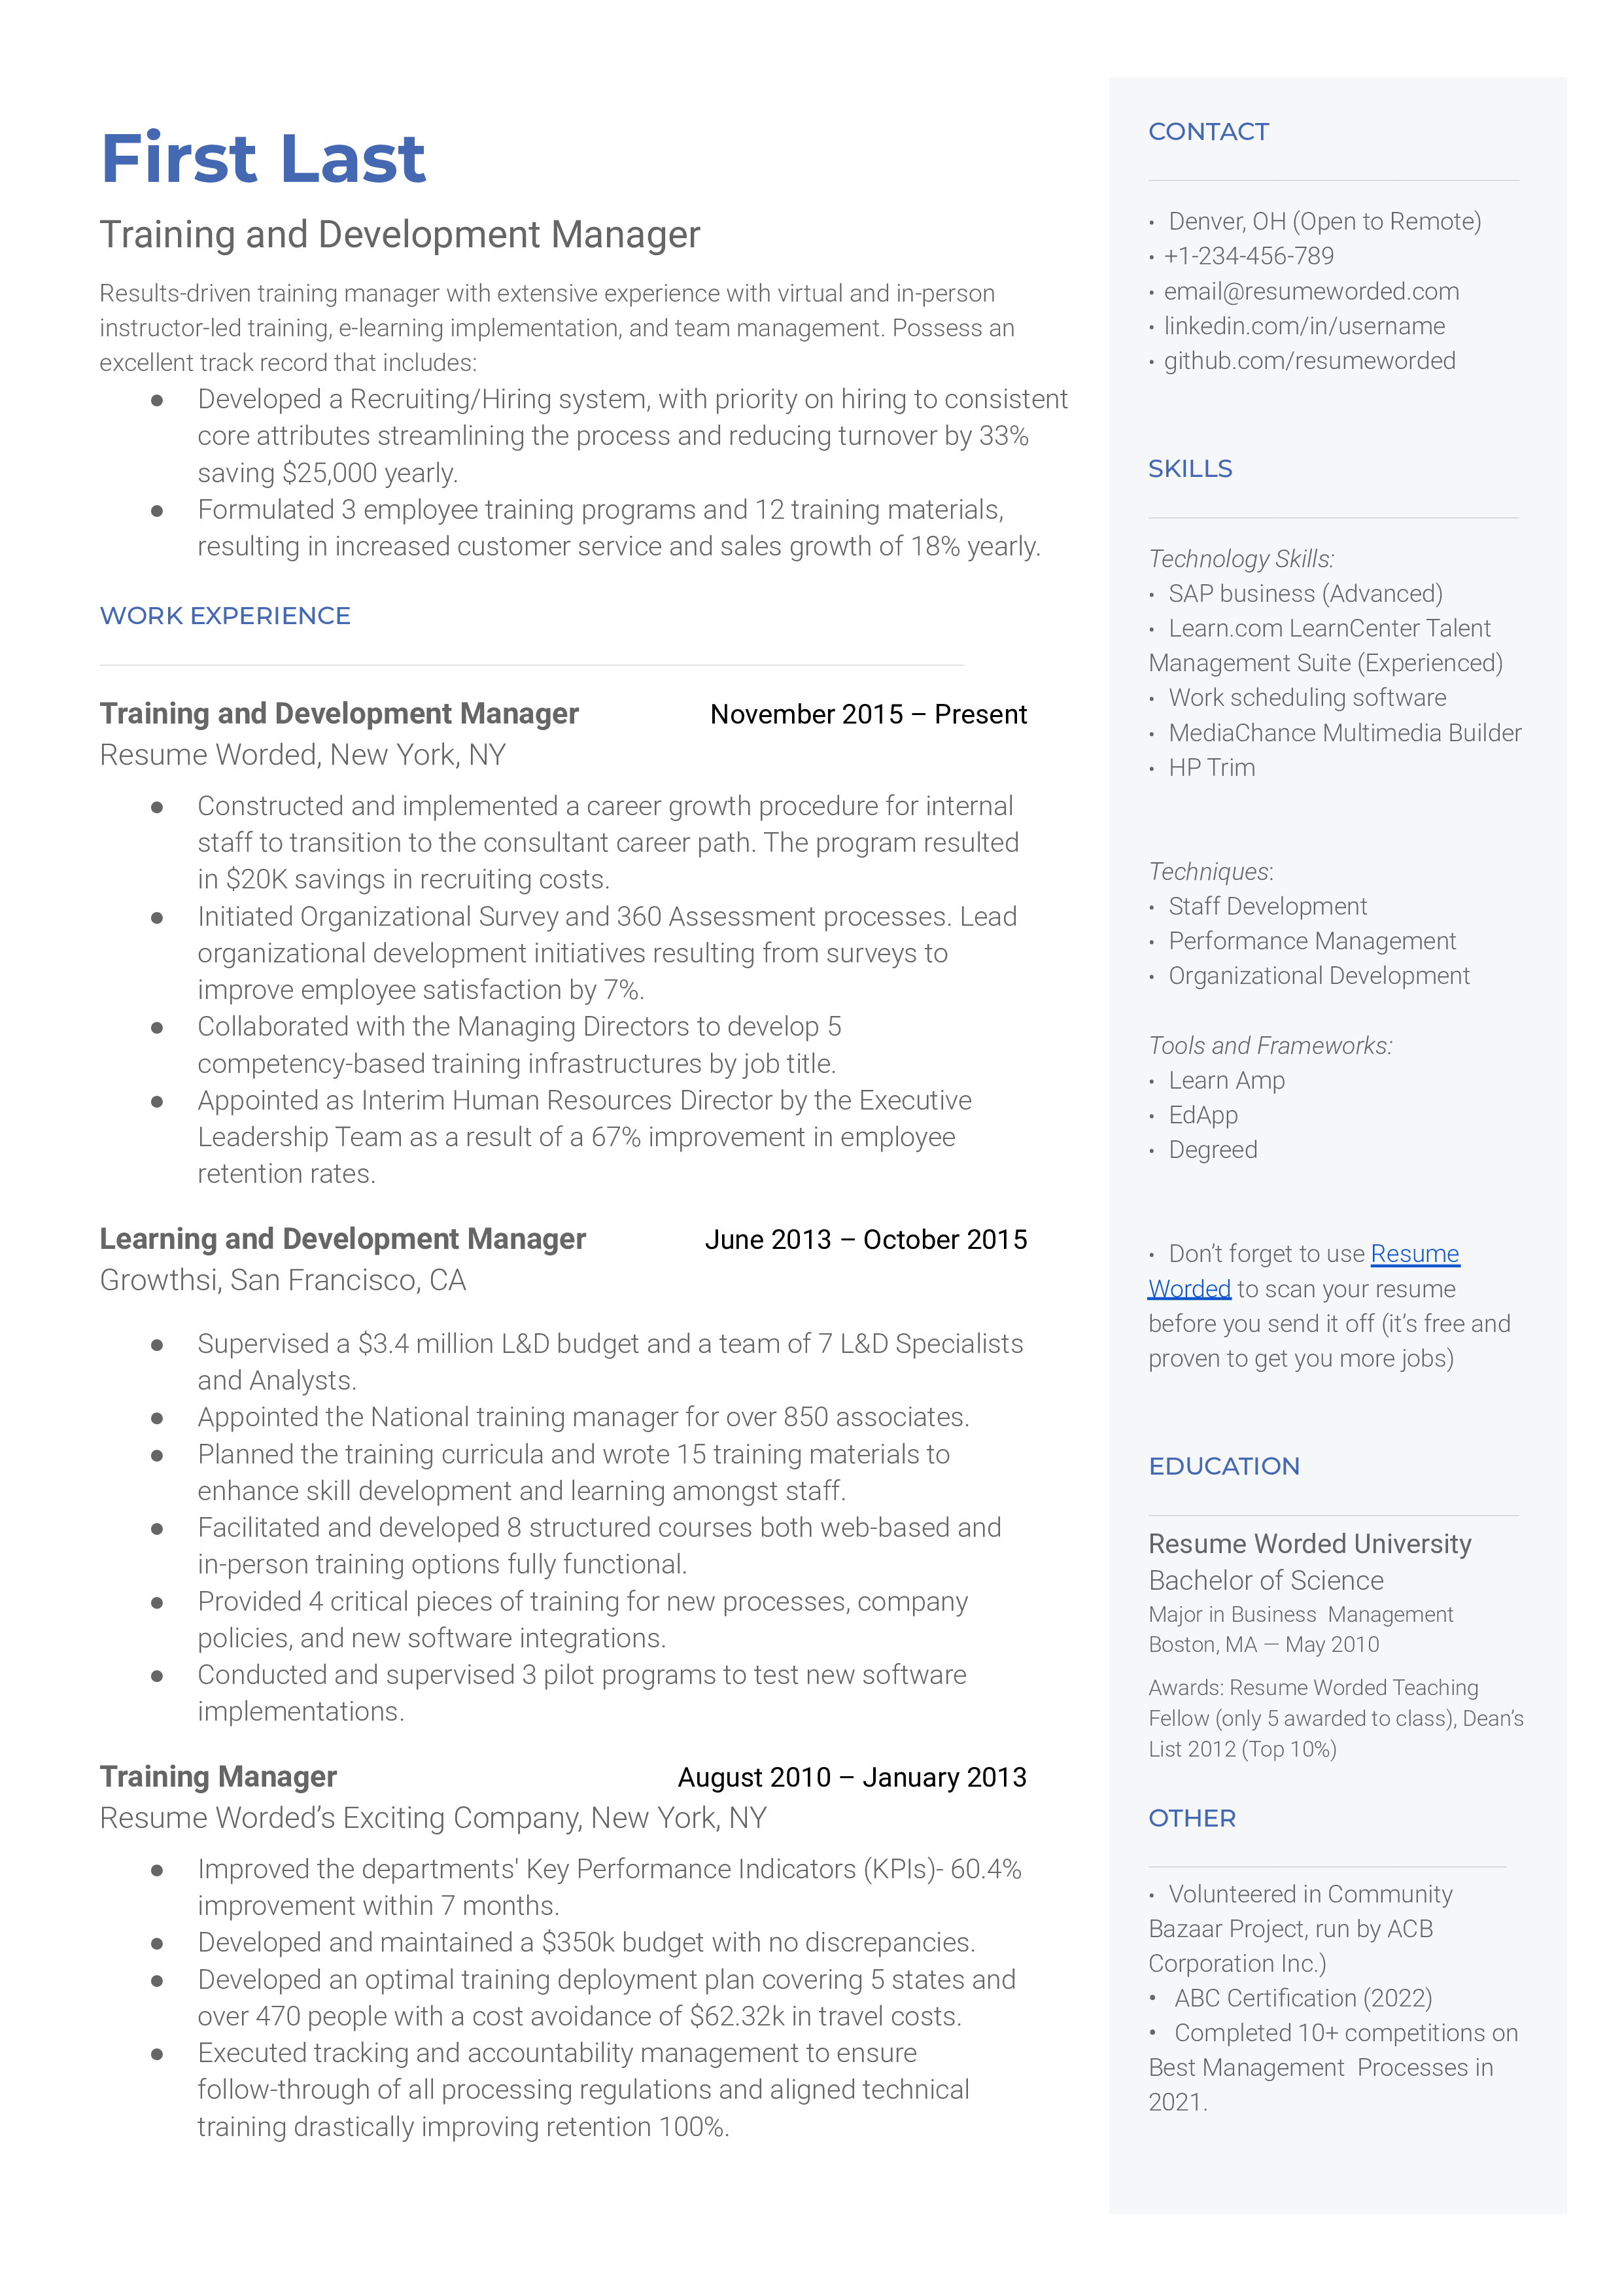 A training and development manager resume sample that highlights the applicant’s longevity and experience as a trainer.